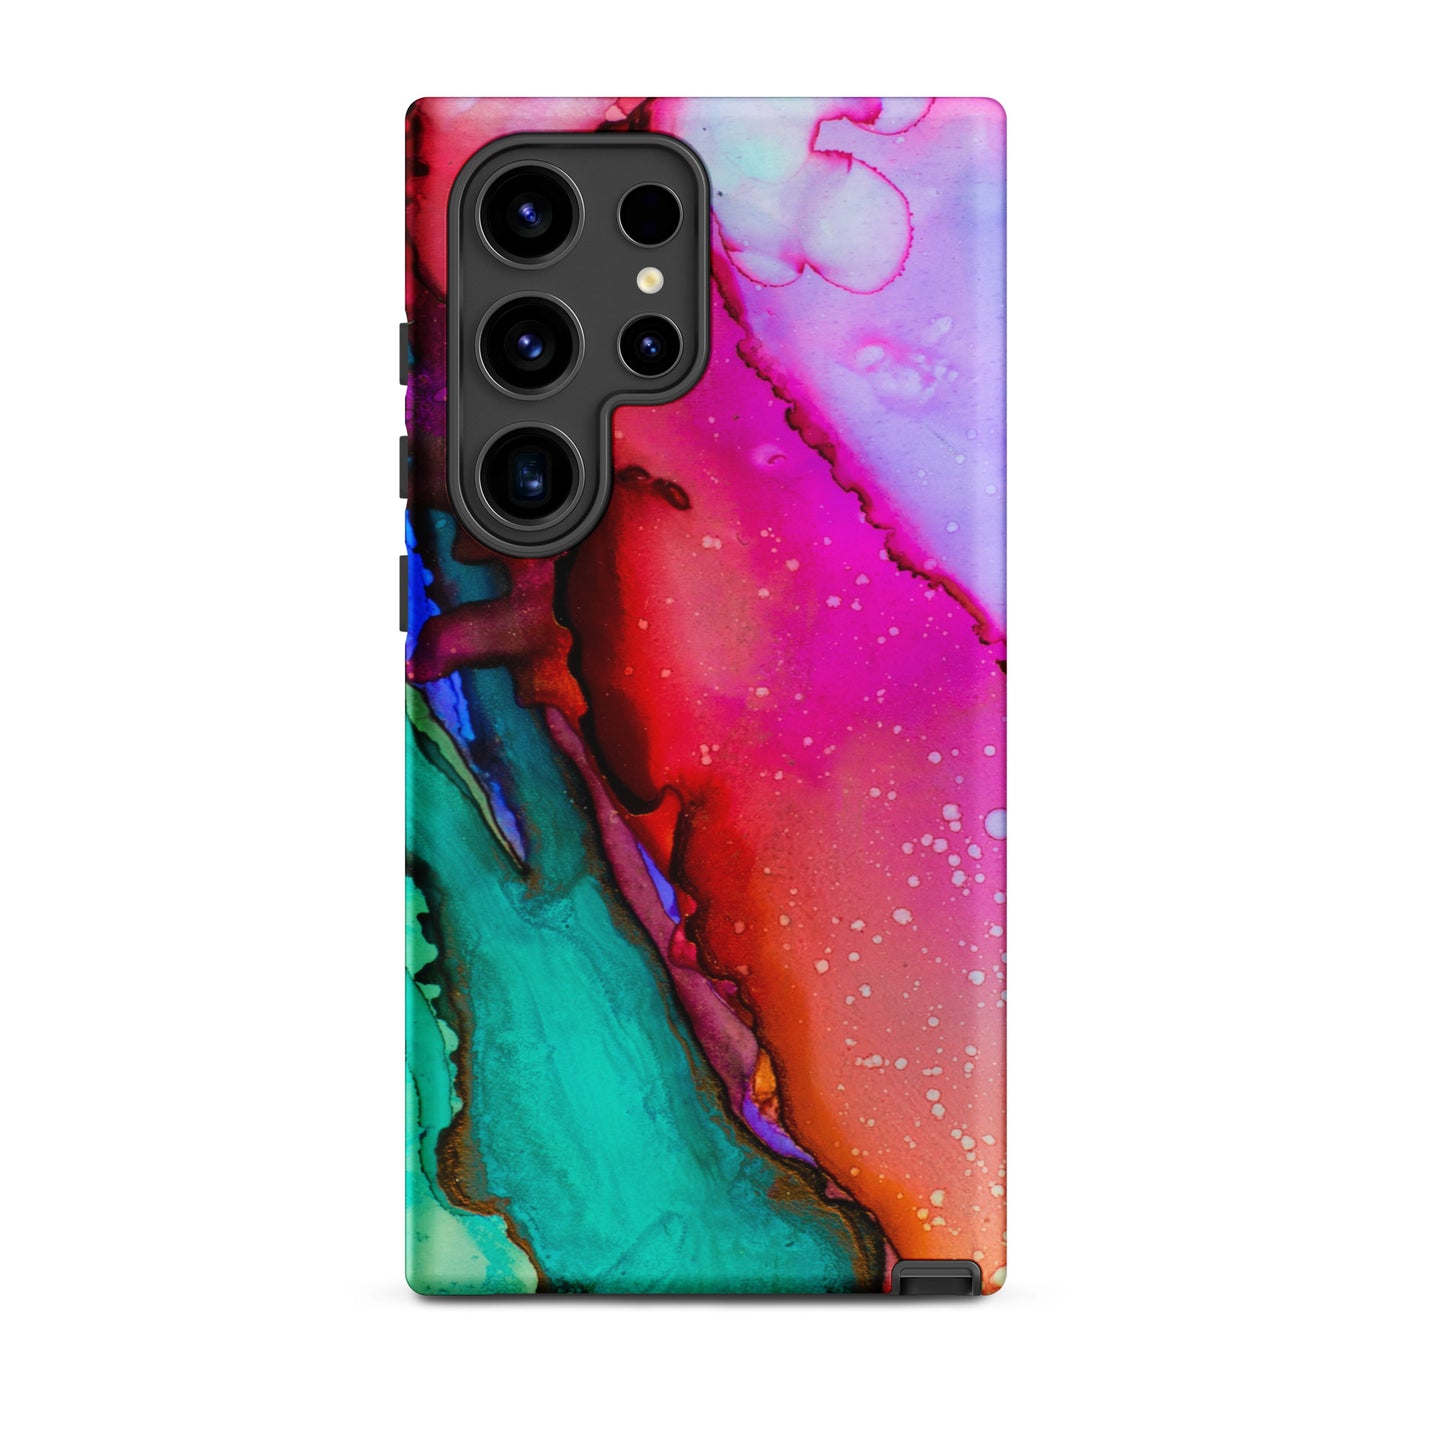 Stained Samsung® Case